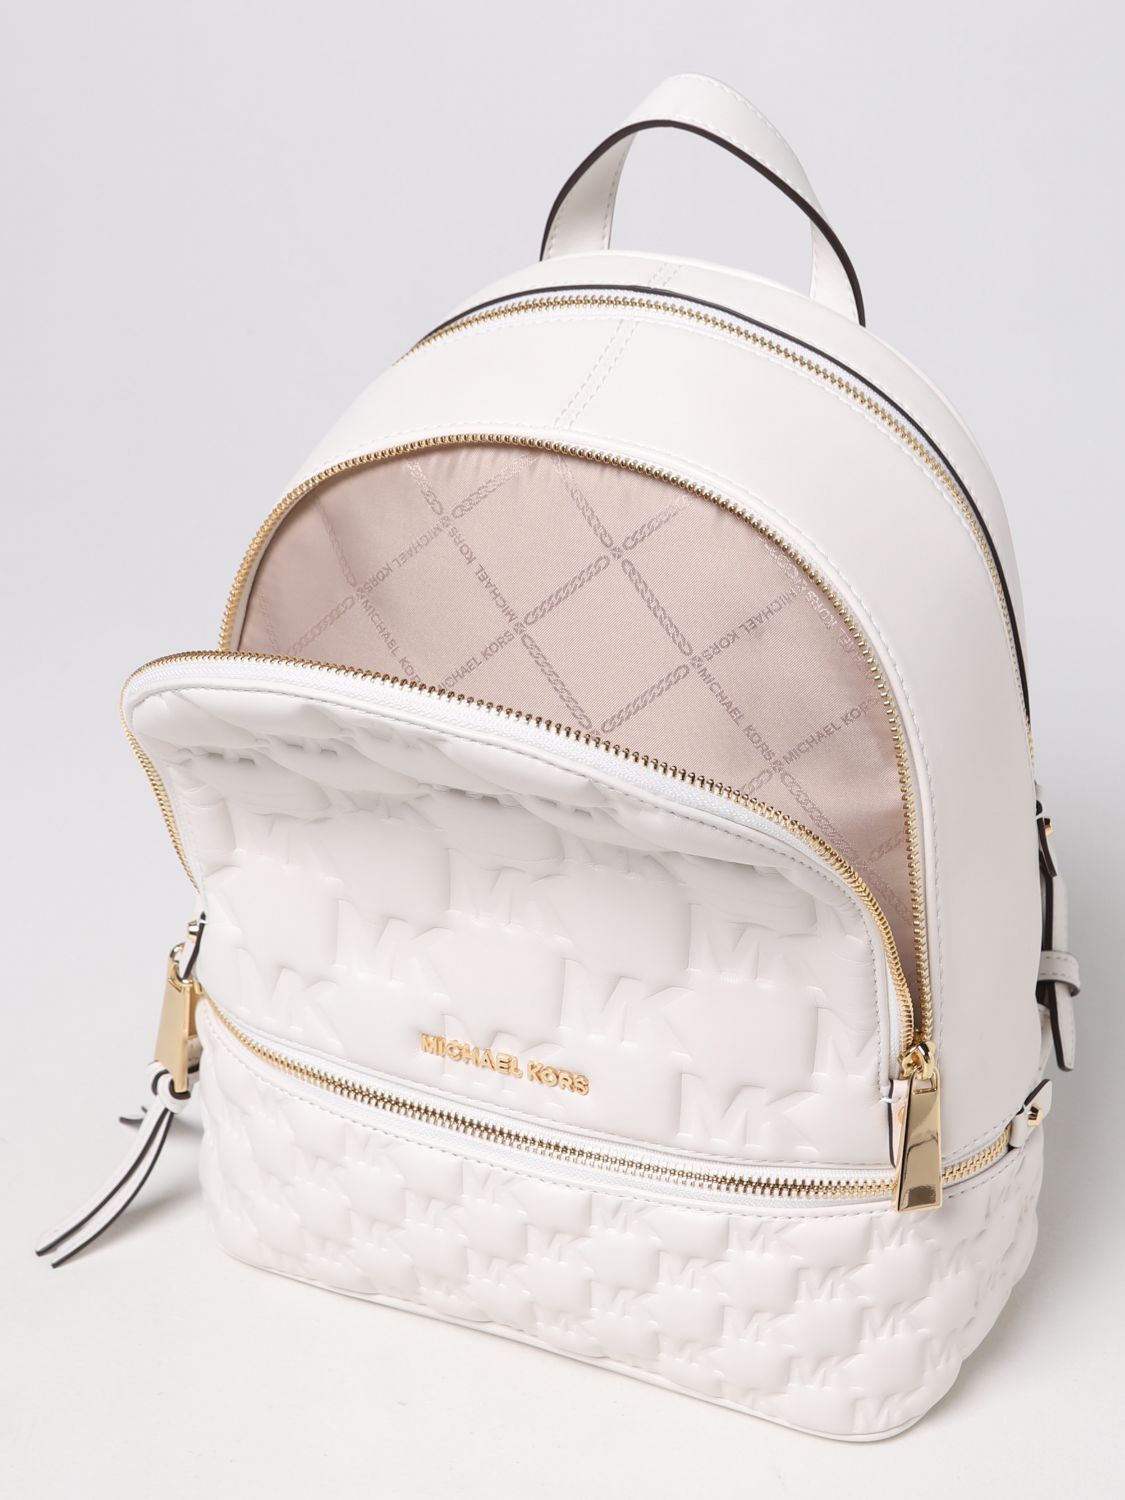 MICHAEL KORS: Michael backpack in leather with monogram - White